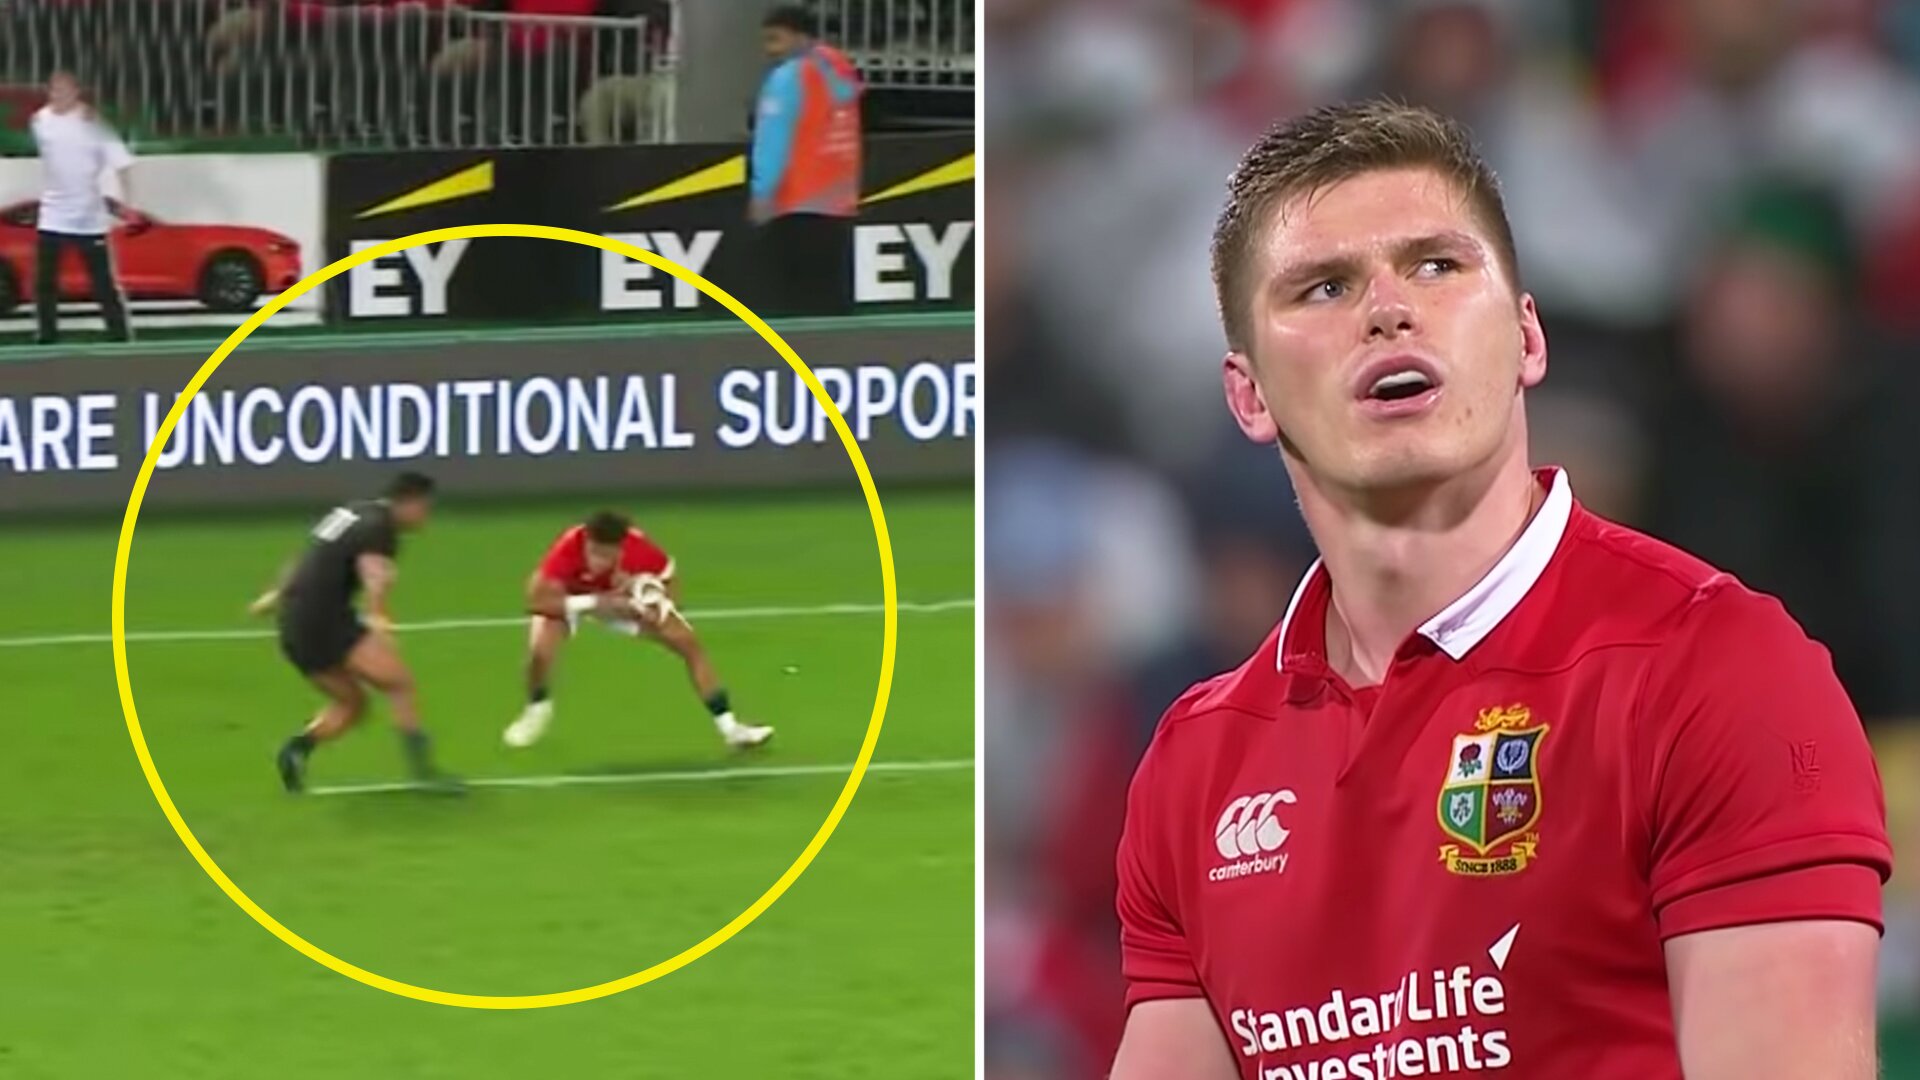 People don't realise how ferocious the gameplay got in the 2017 Lions Series